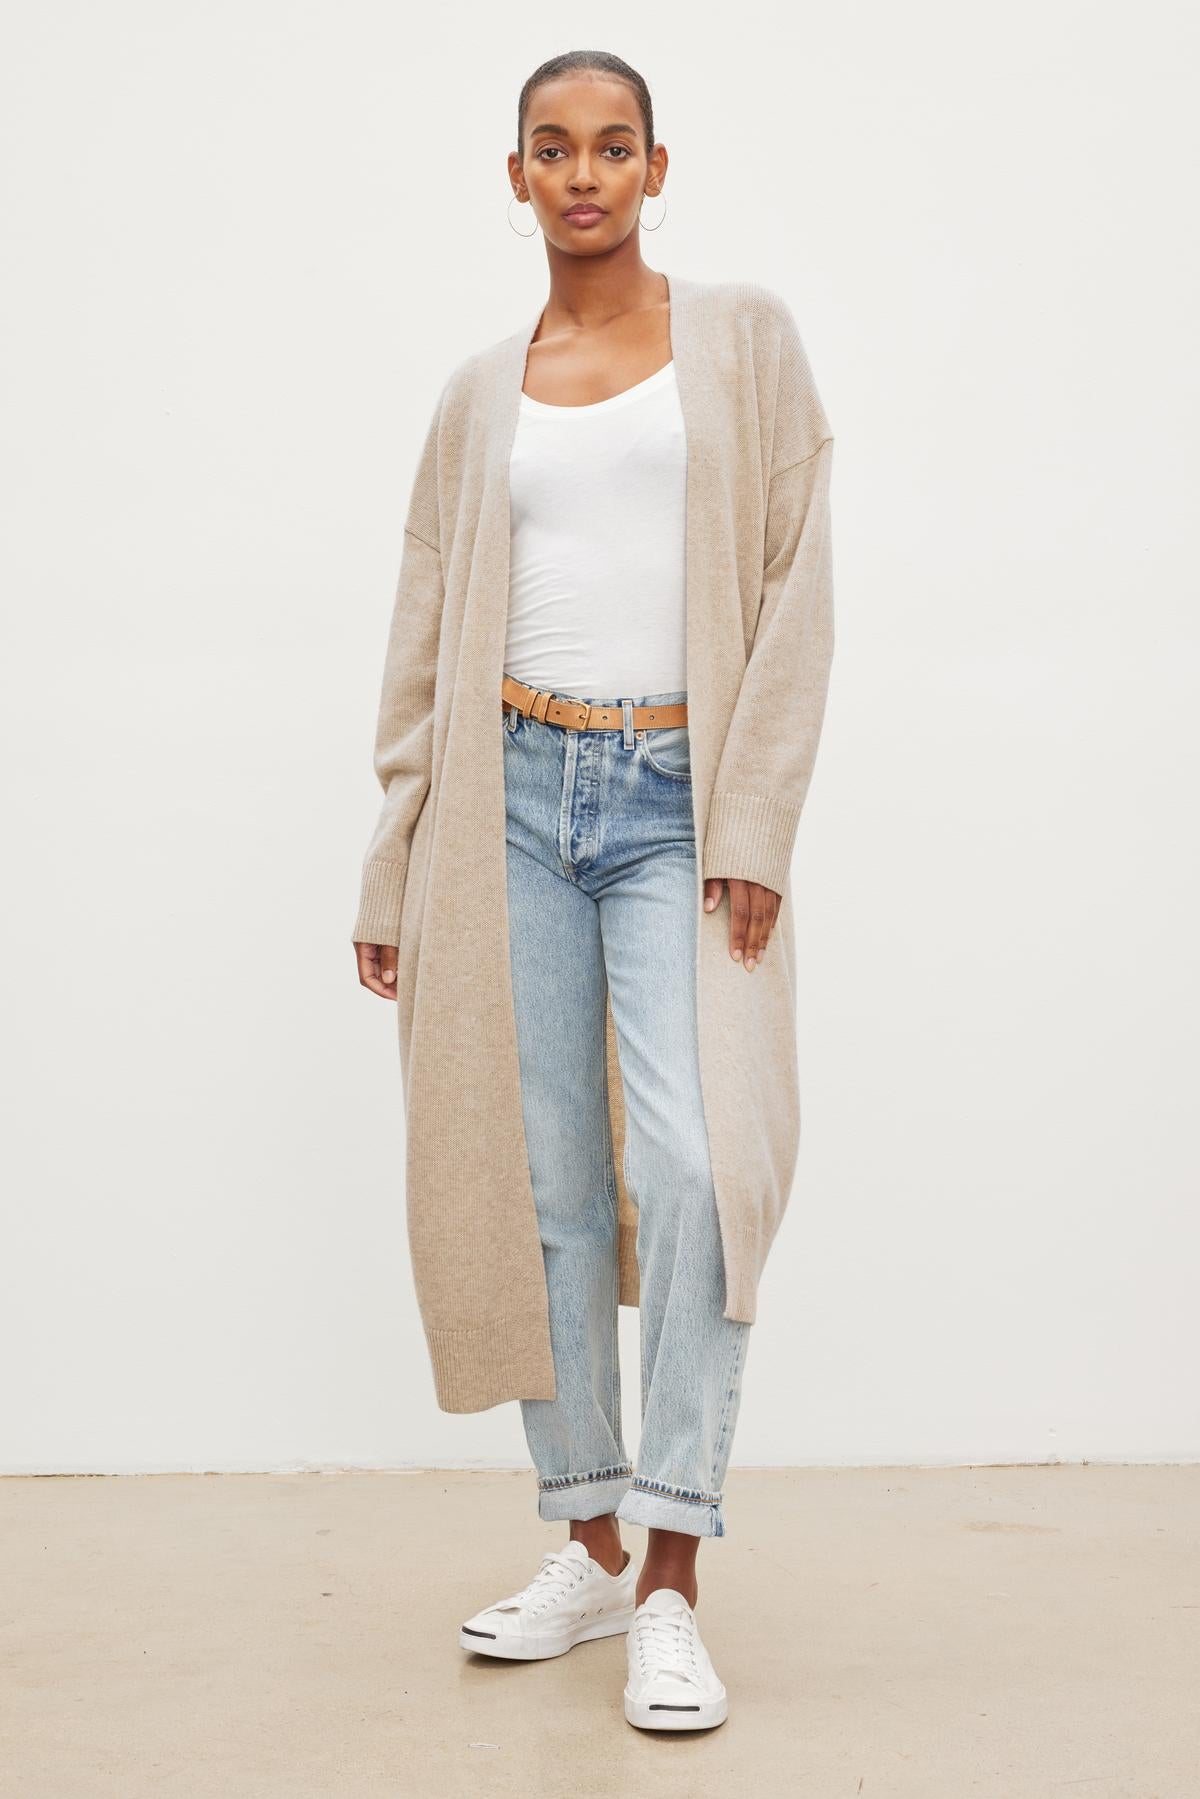 A model wearing jeans and the Velvet by Graham & Spencer LISA WOOL CASHMERE DUSTER CARDIGAN in beige.-26921634660545